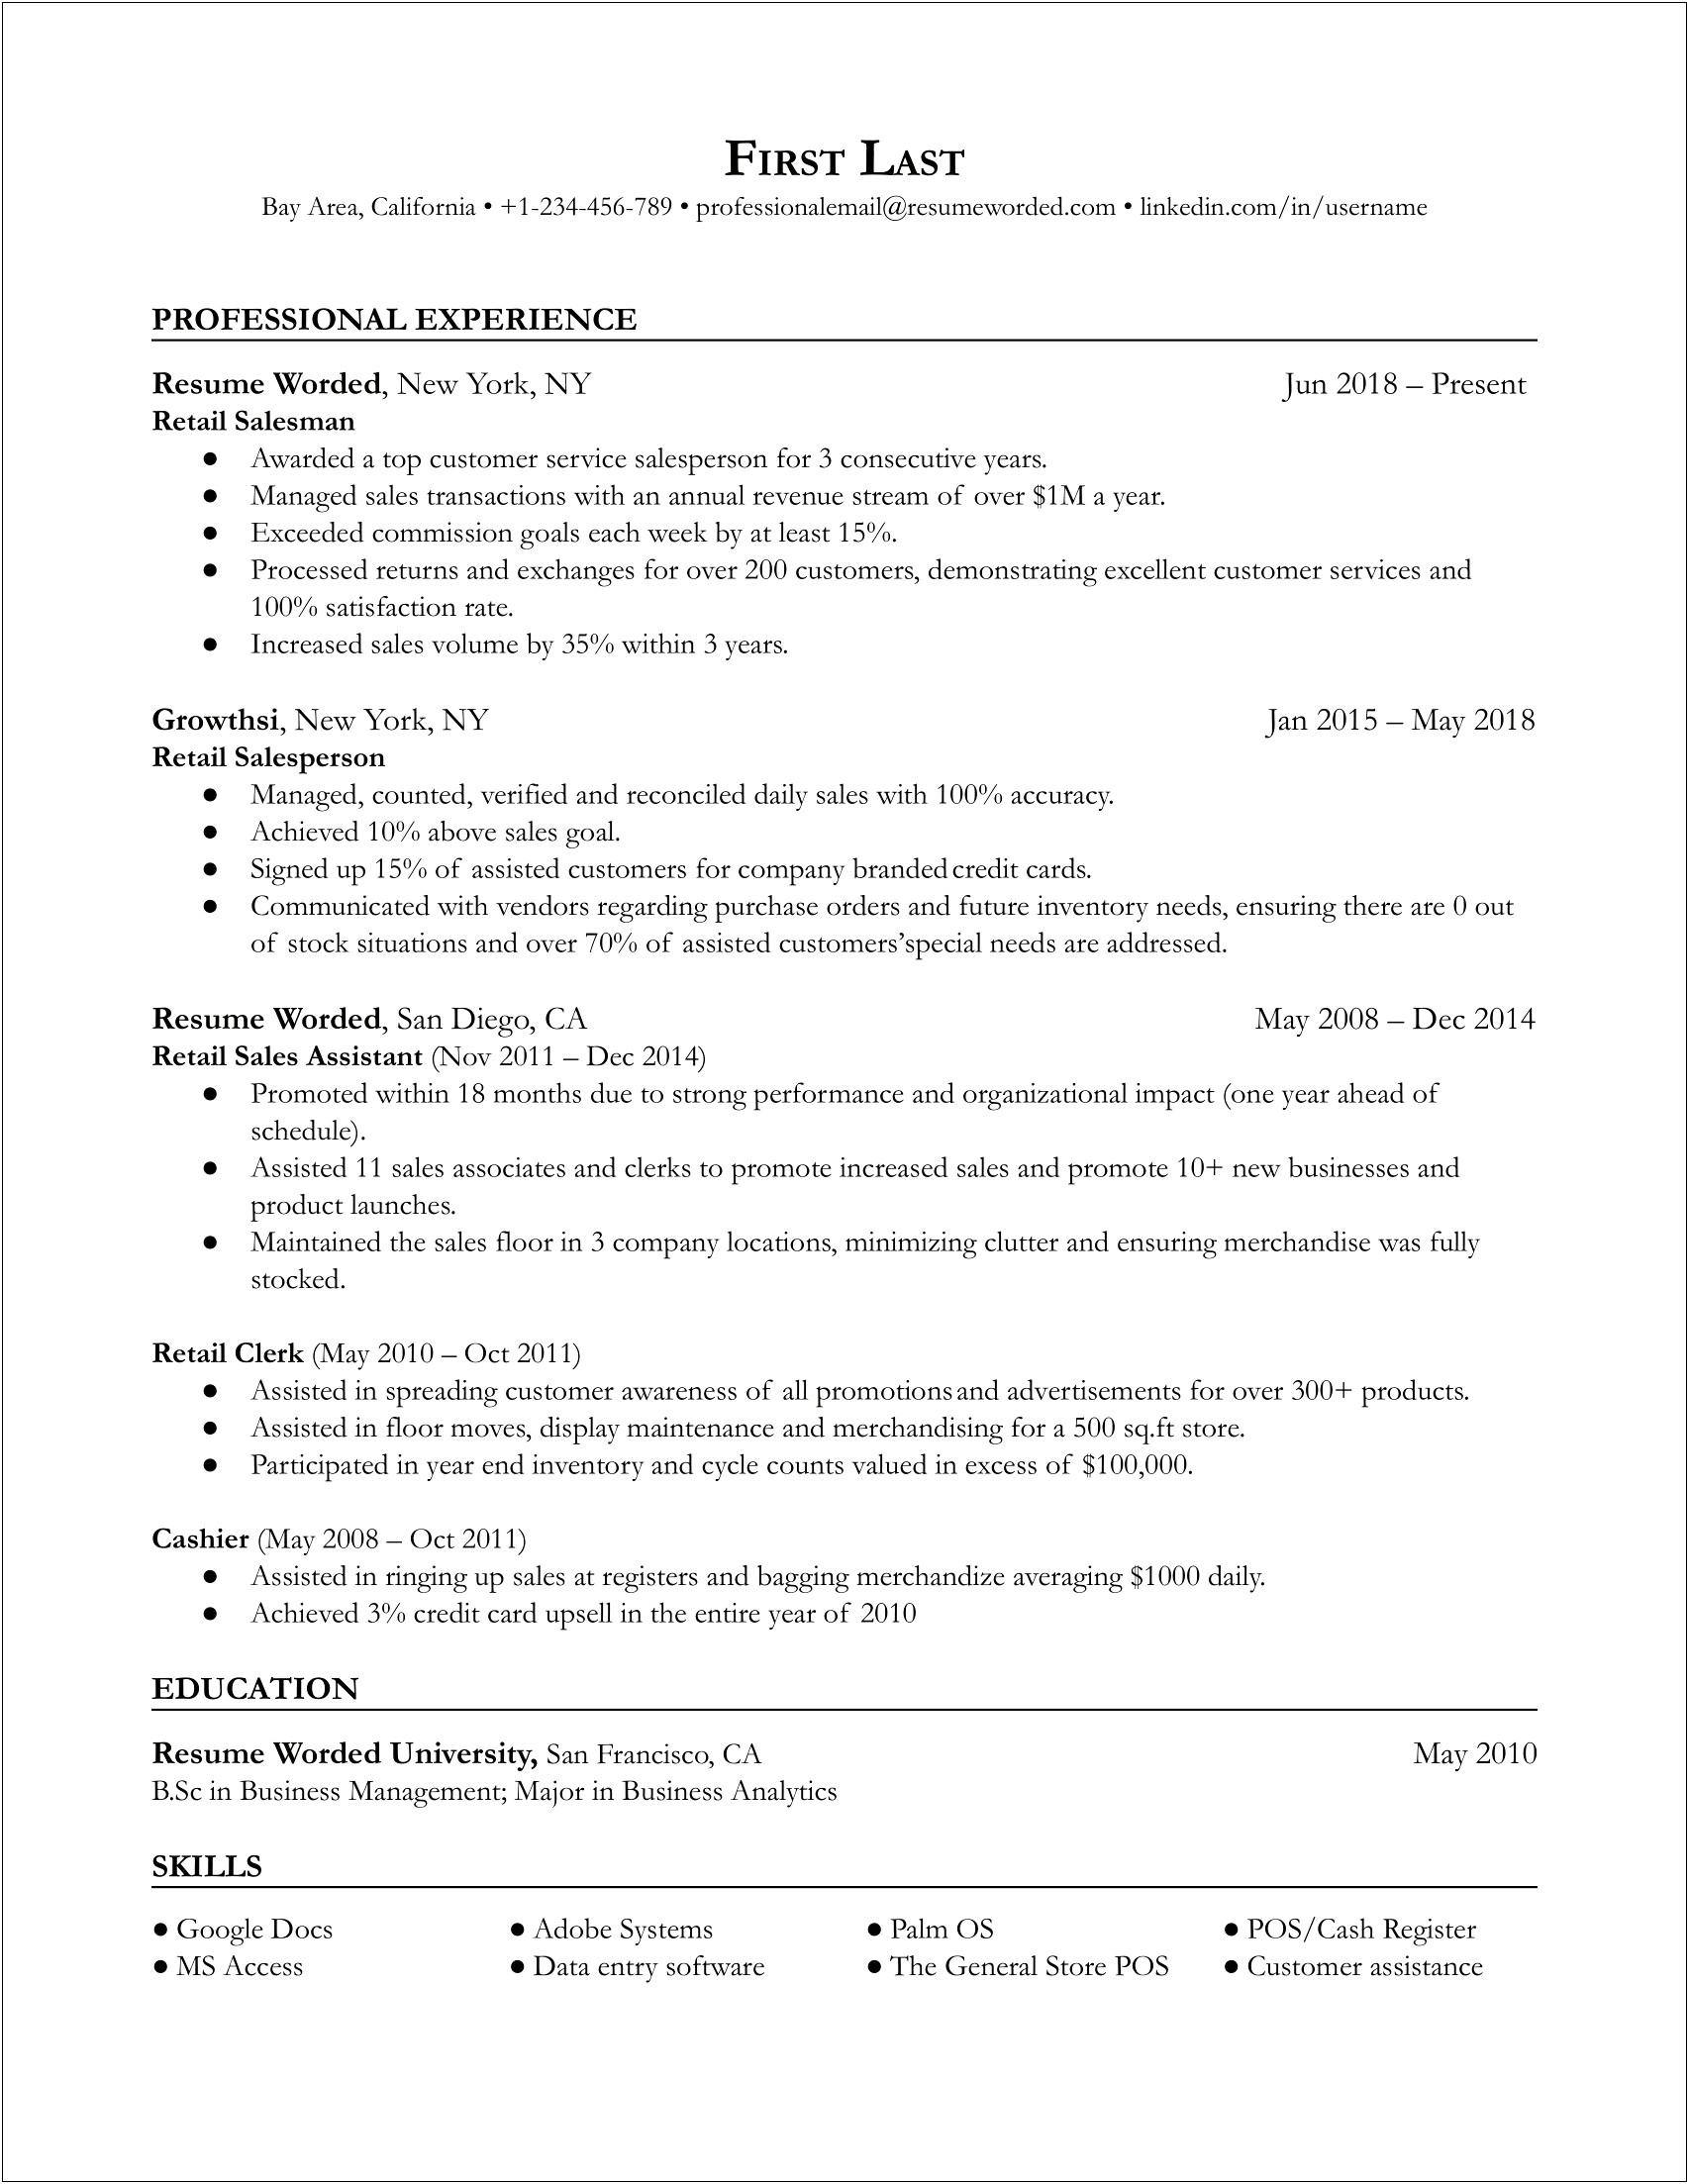 Sample Resume For People Who Worked In Retail